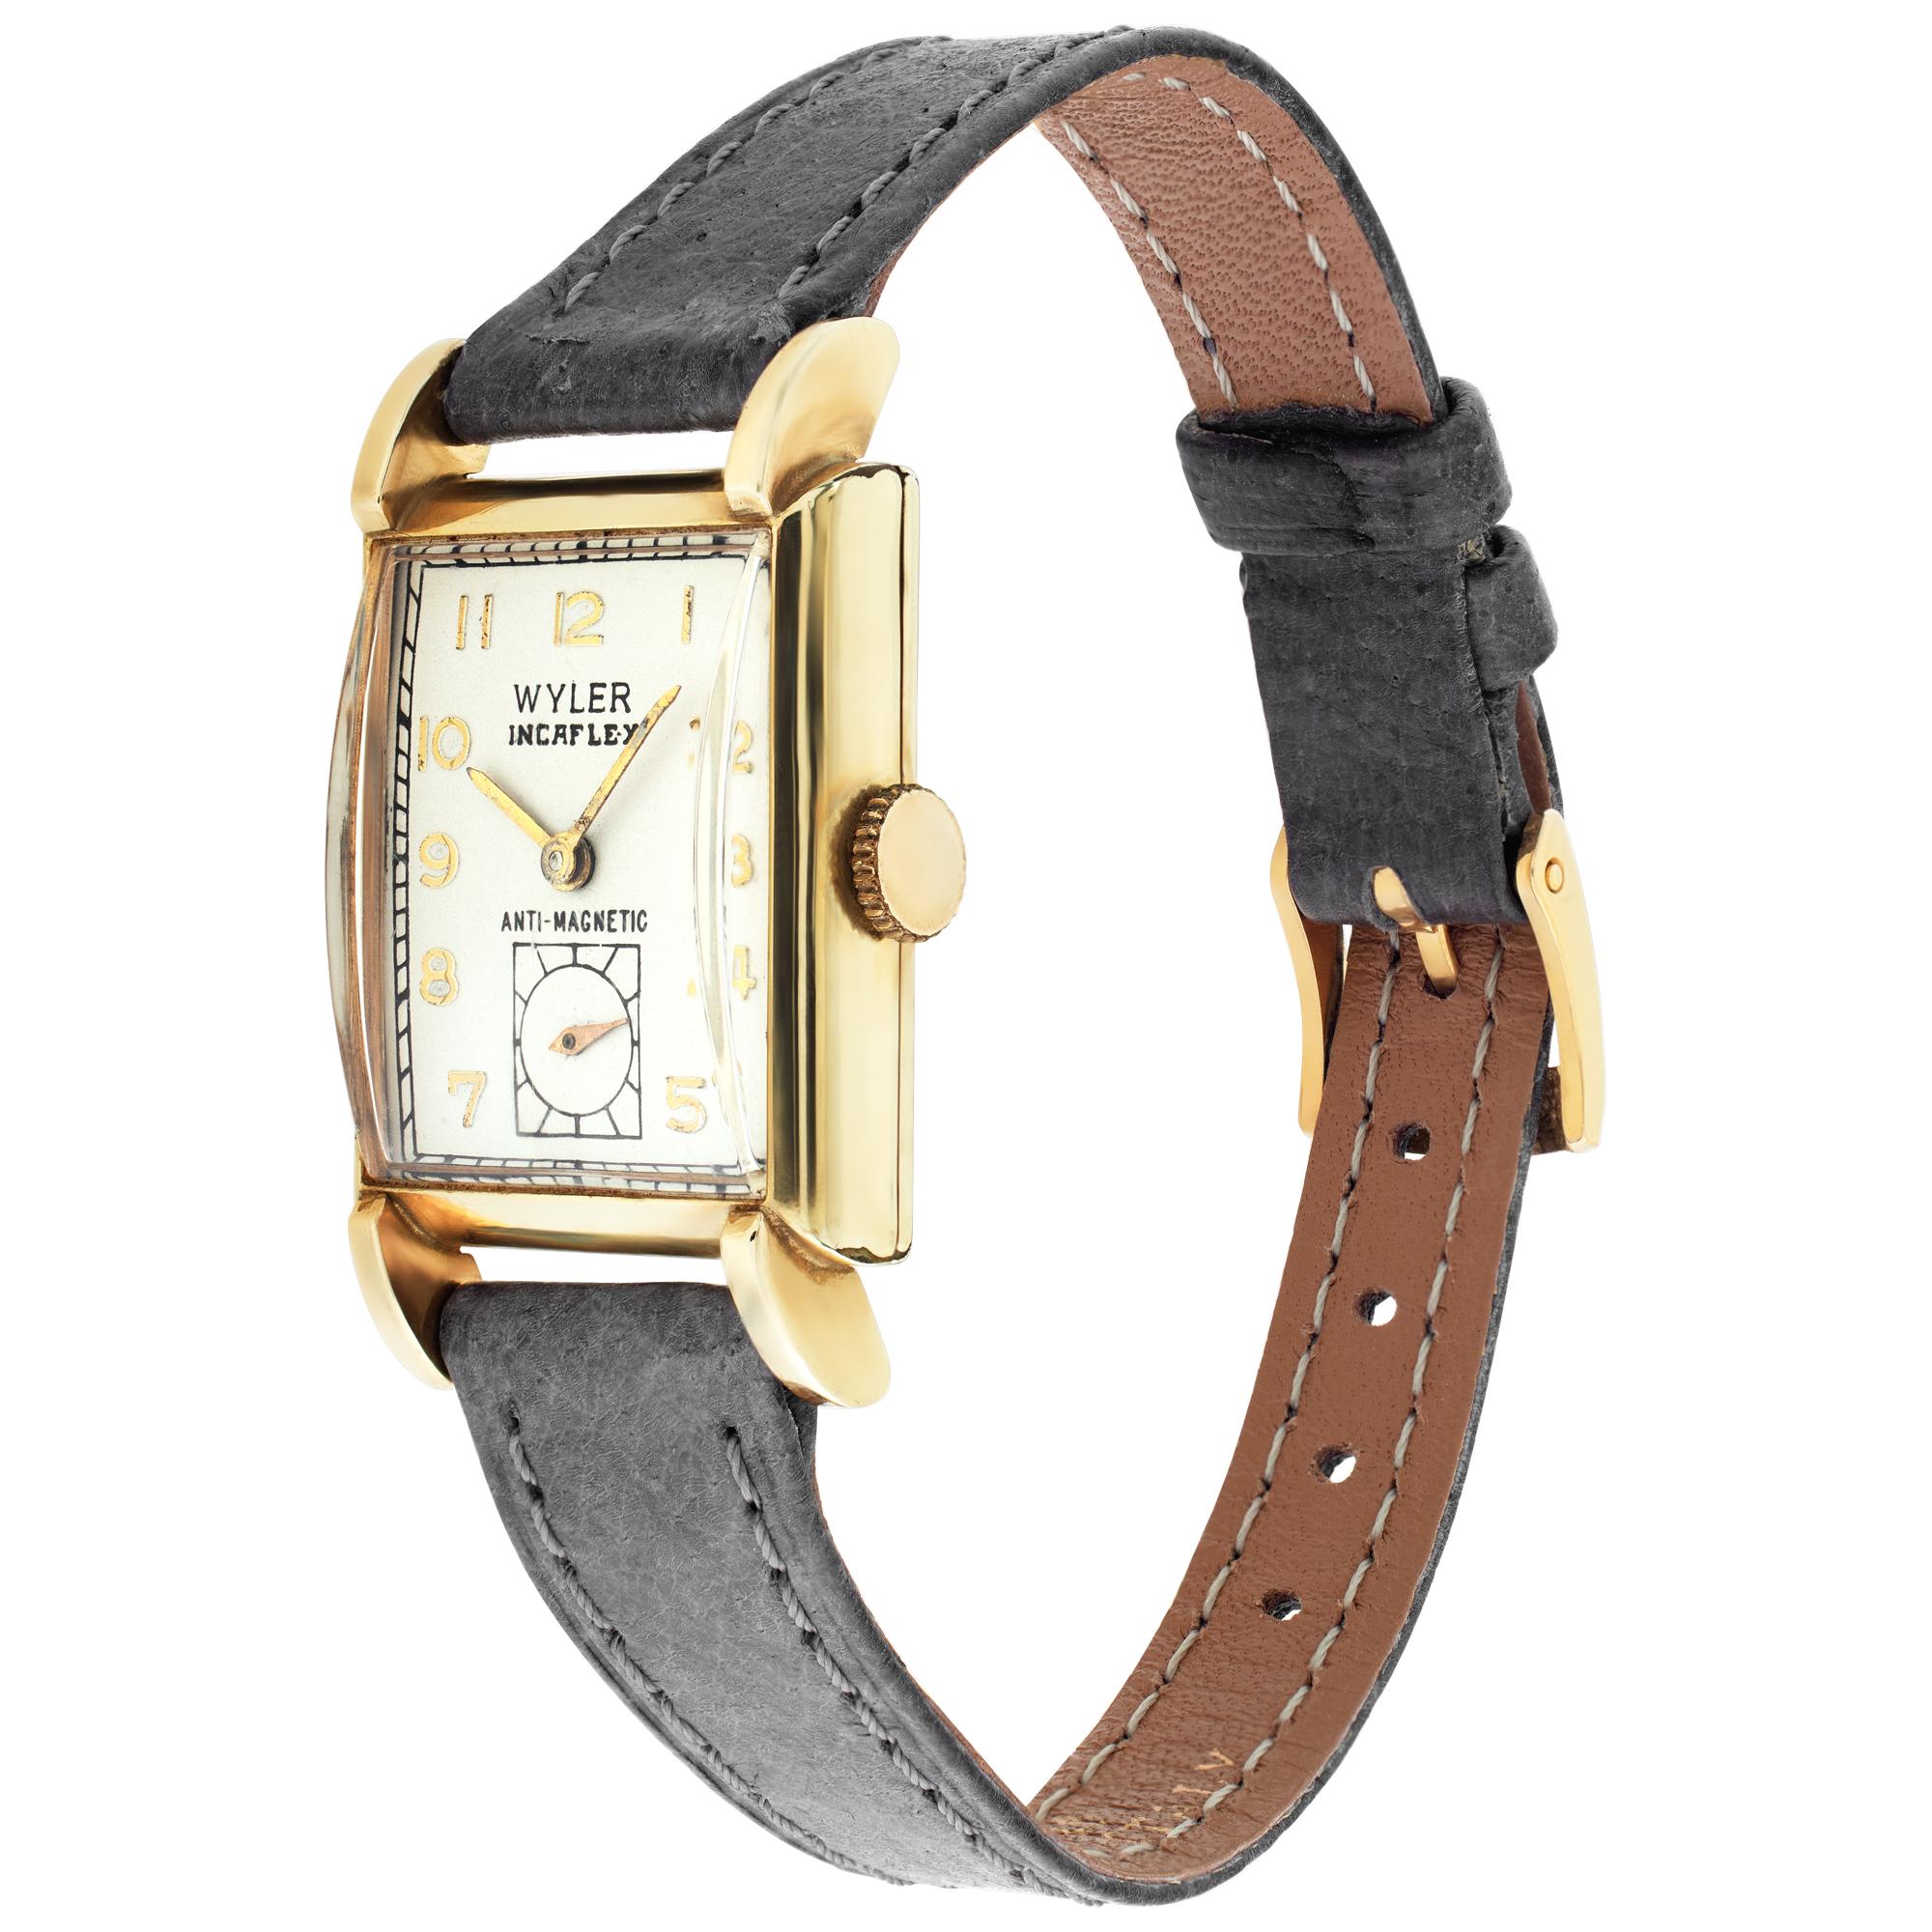 Unisex Wyler Incaflex anti-magnetic gold fill case, gold fill bezel,  leather band with two piece clasp. Manual w/ sub-seconds . Certified pre-owned. Circa 1940. Fine Pre-owned Wyler Watch. Certified preowned Vintage Wyler watch on a Gray Leather